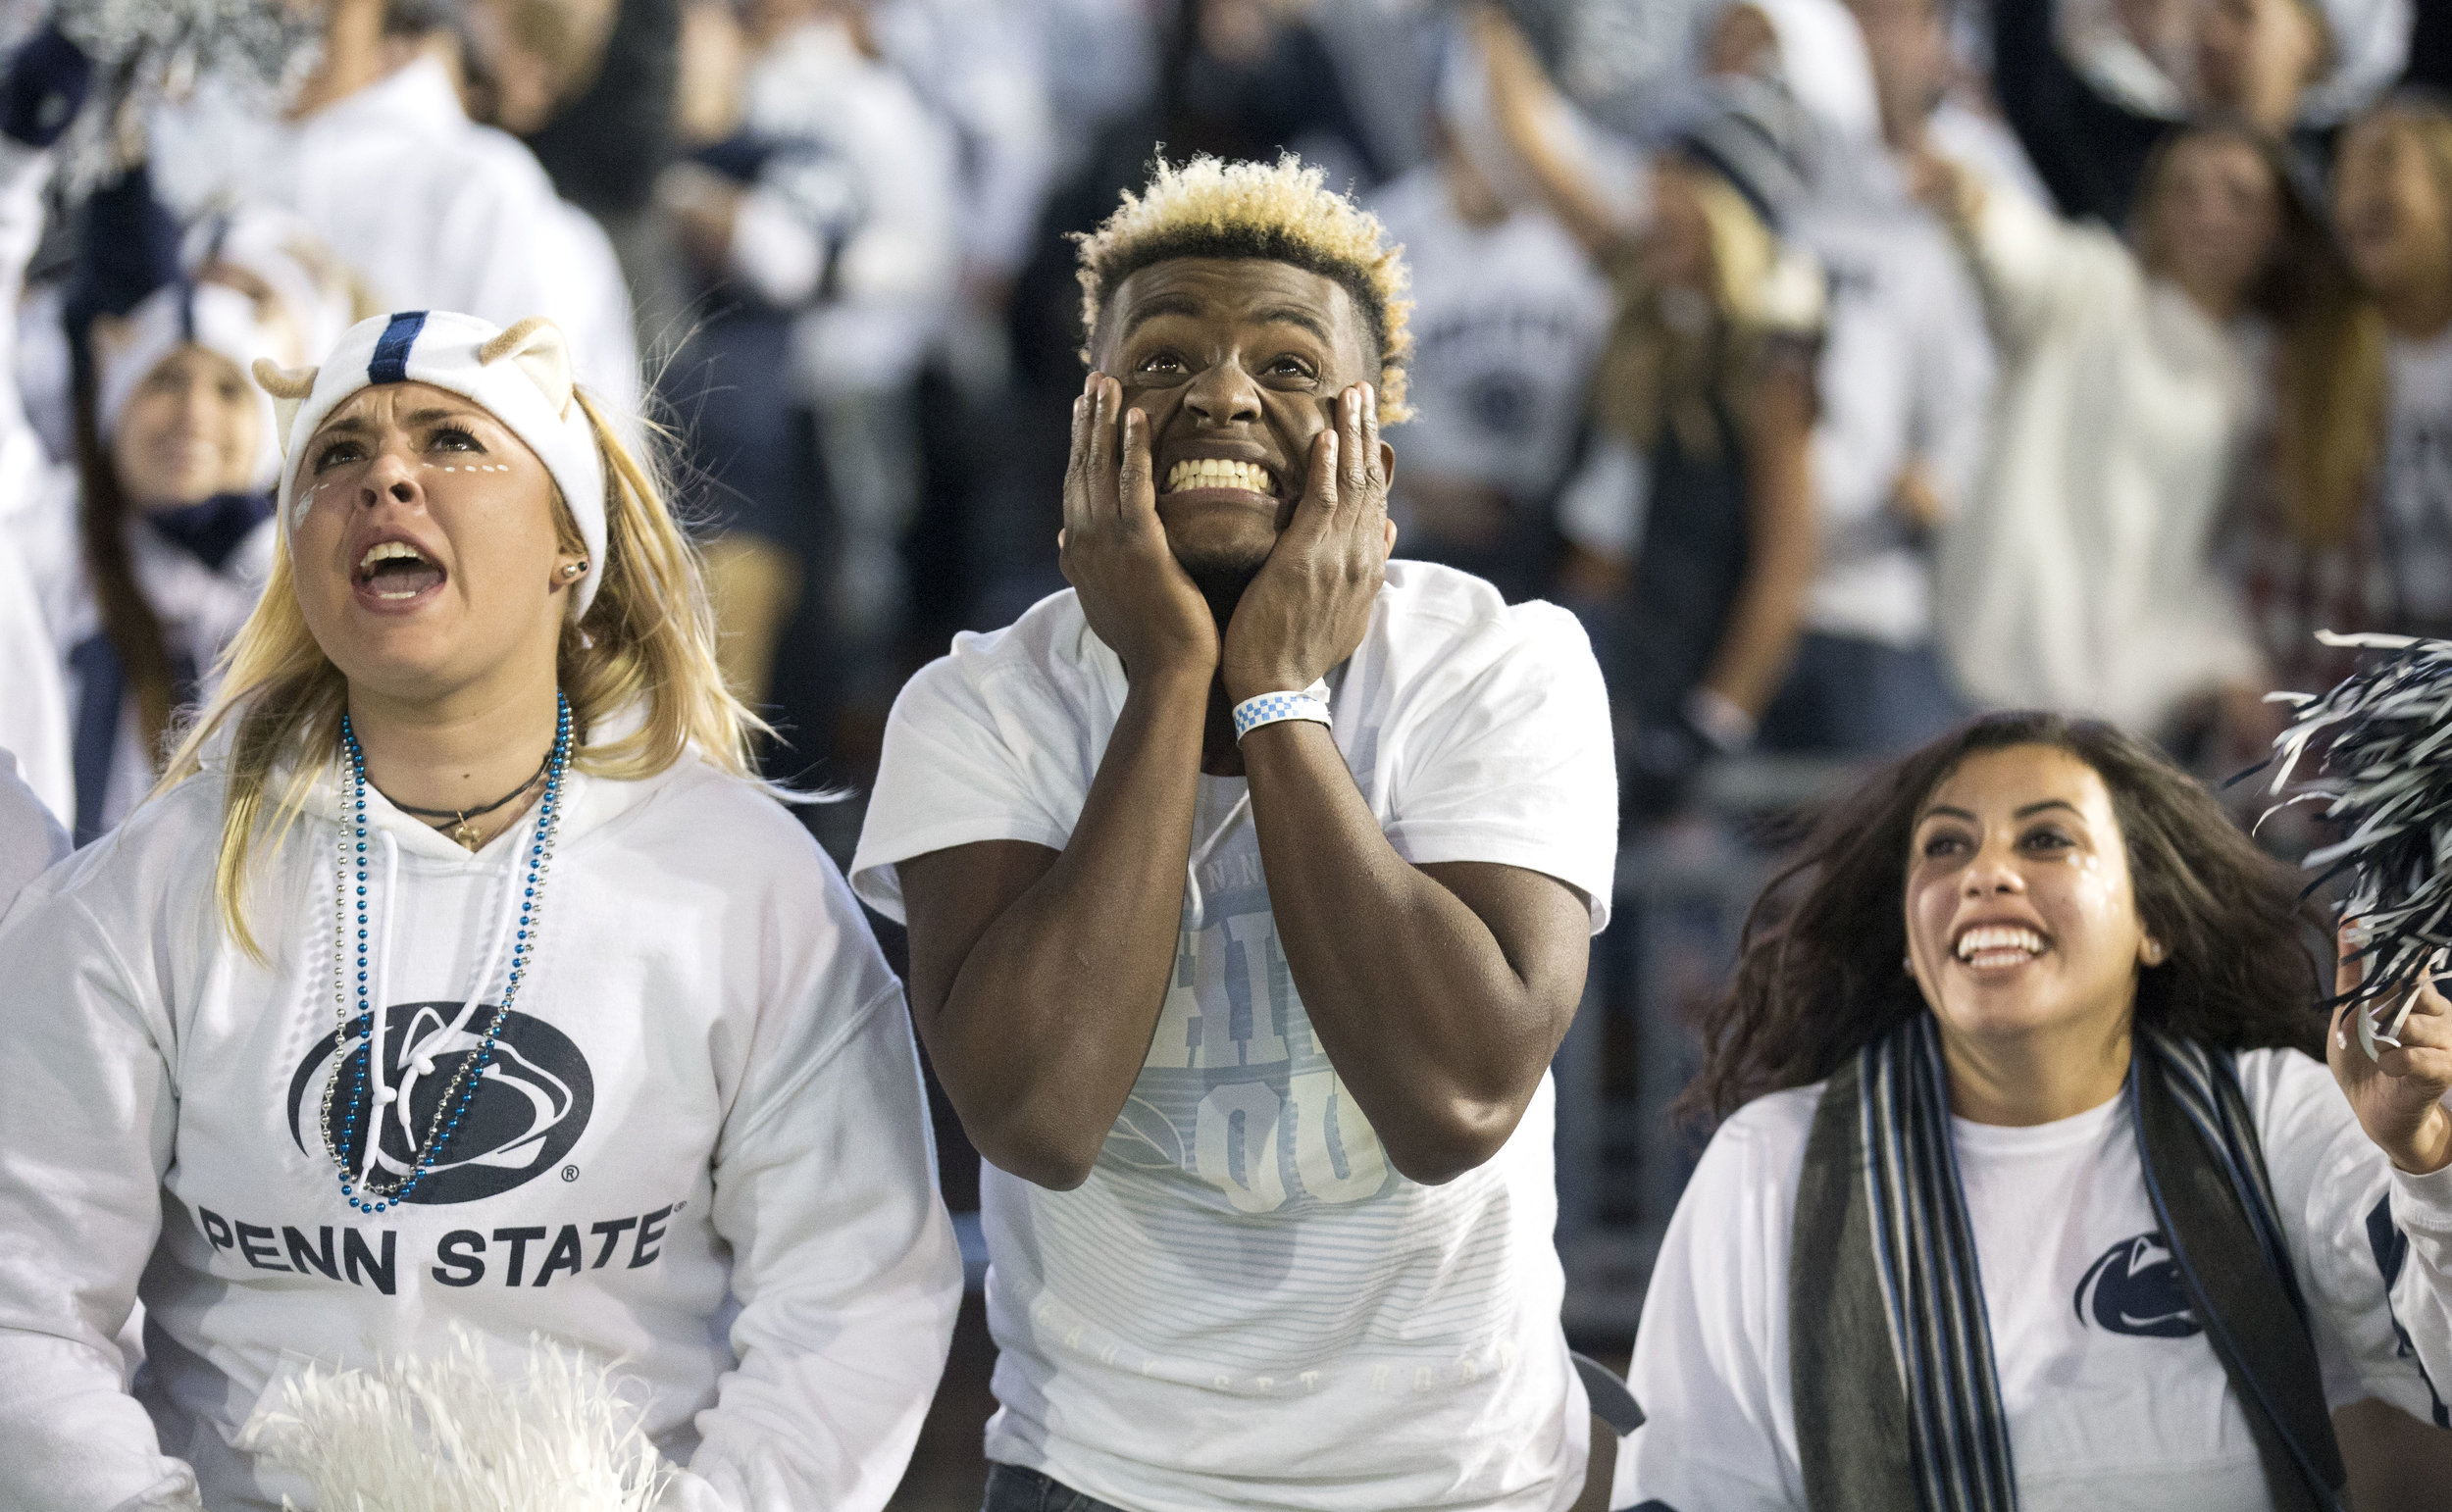  Penn State fans reacts after a touchdown is almost scored during the game against Iowa at Beaver Stadium on Saturday, Nov. 5, 2016. The Nittany Lions defeated Iowa 41-14. 